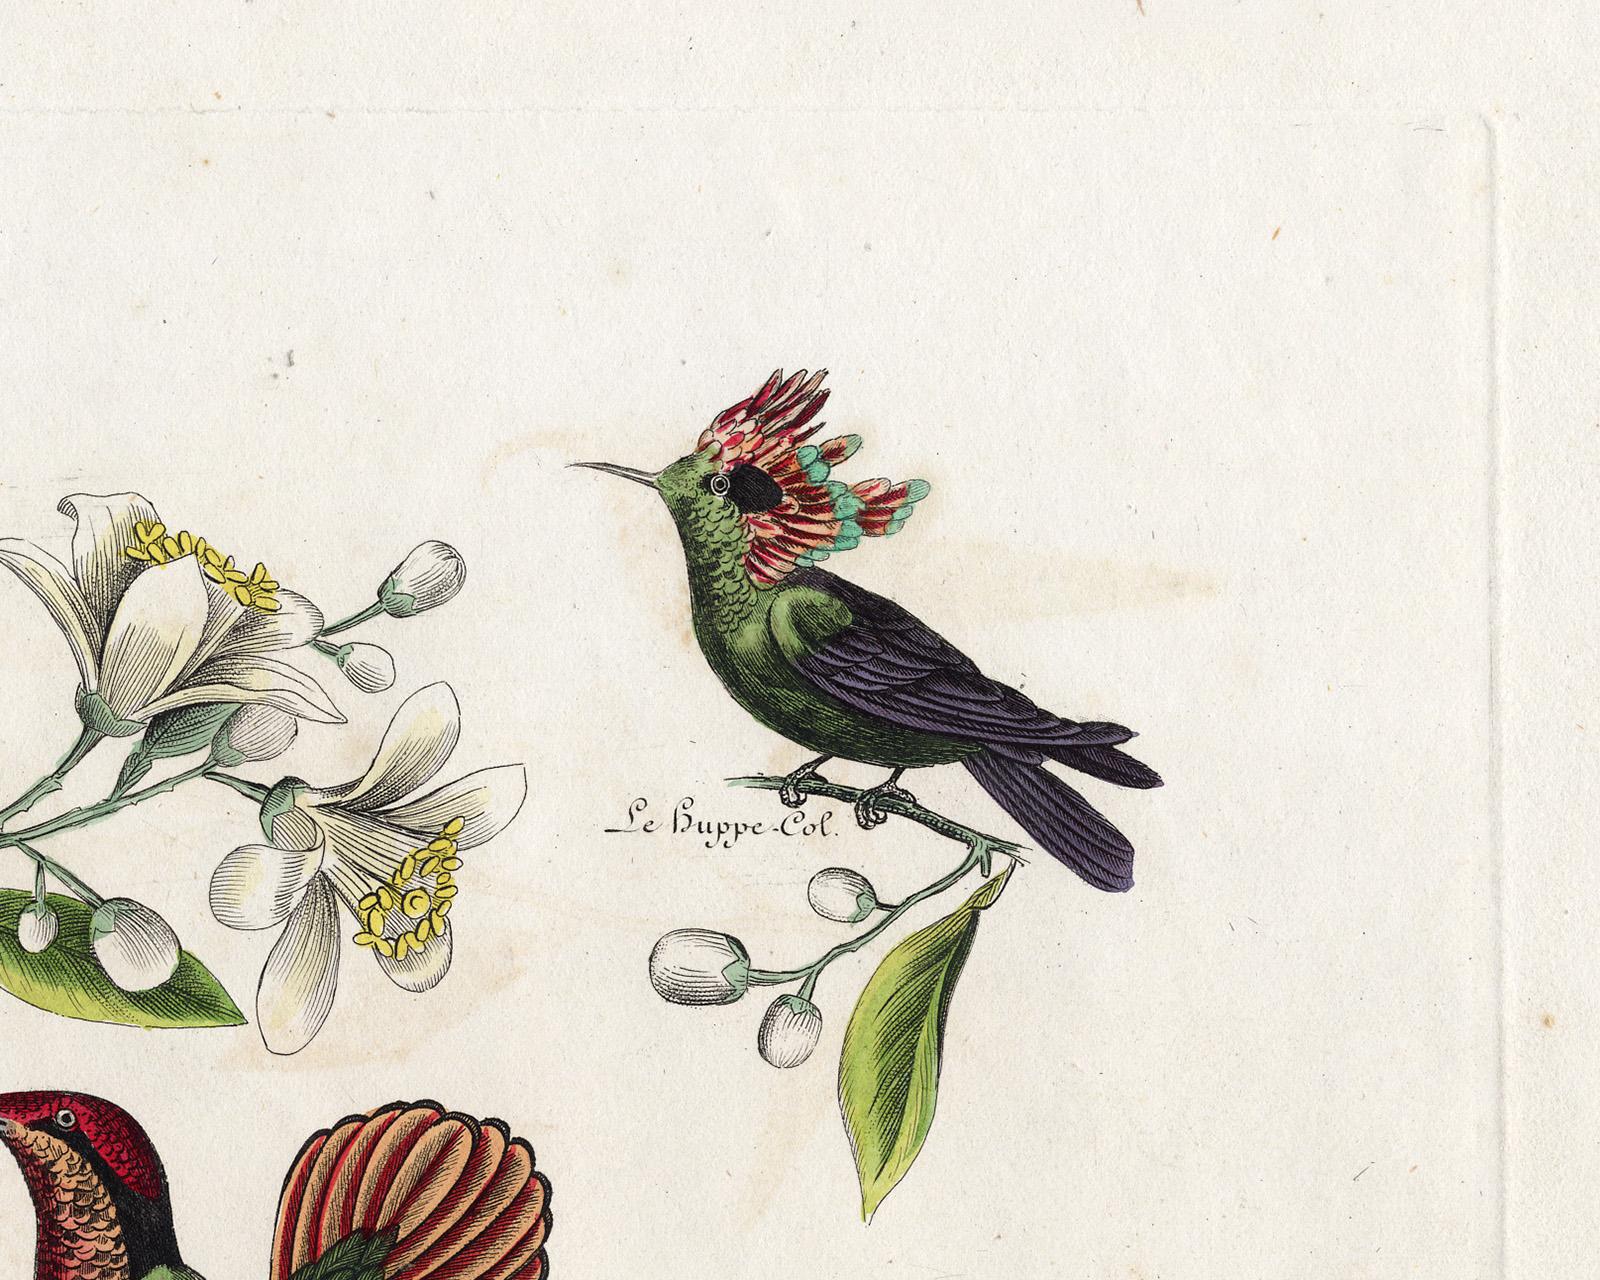 Three different Hummingbirds by Pauquet - Hand coloured engraving - 19th century - Beige Animal Print by Hippolyte Louis Emile Pauquet and Polydore Pauquet